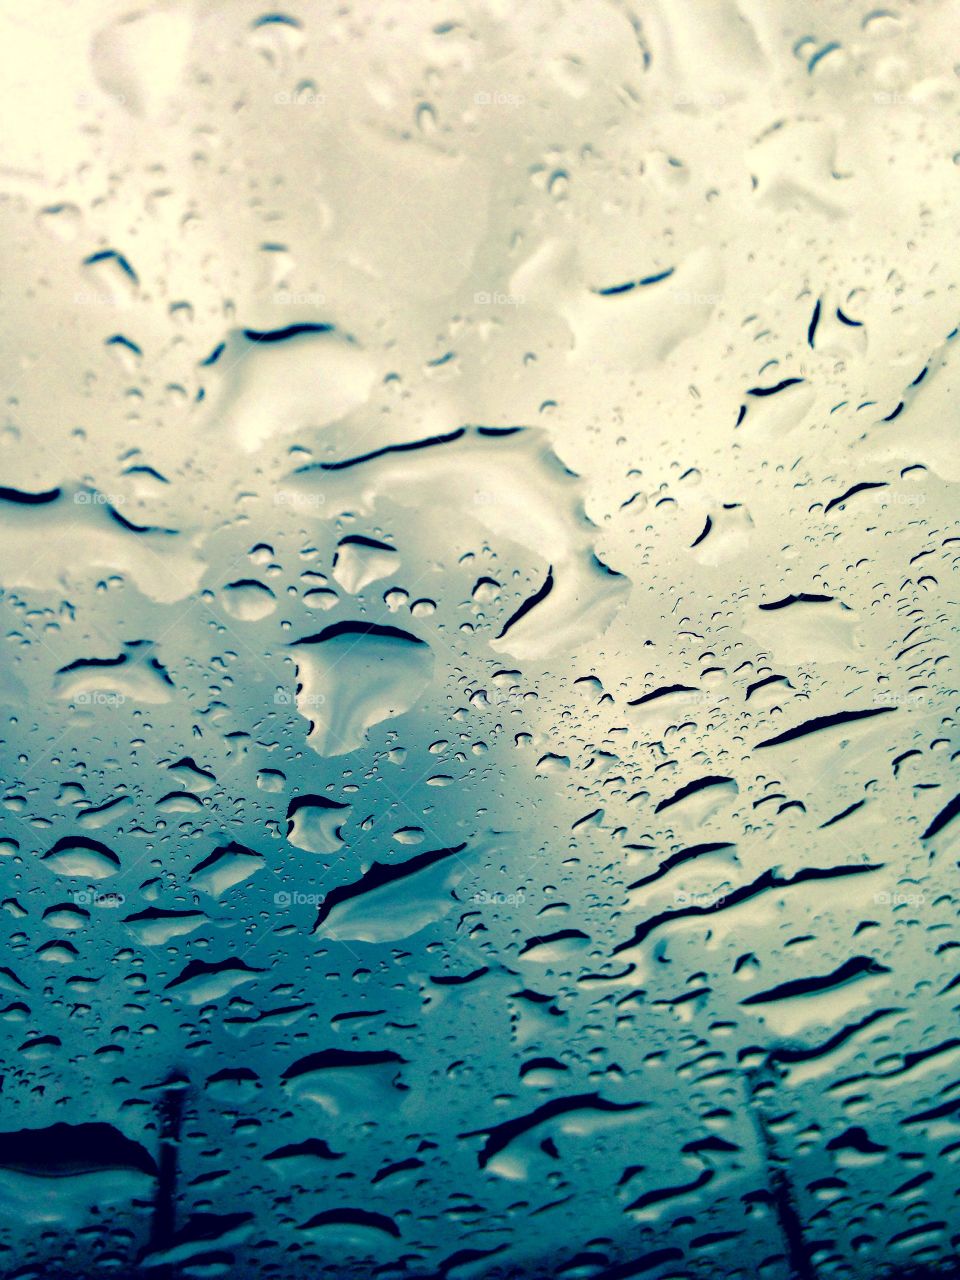 Raindrops on a cloudy day, on top of my sunroof.